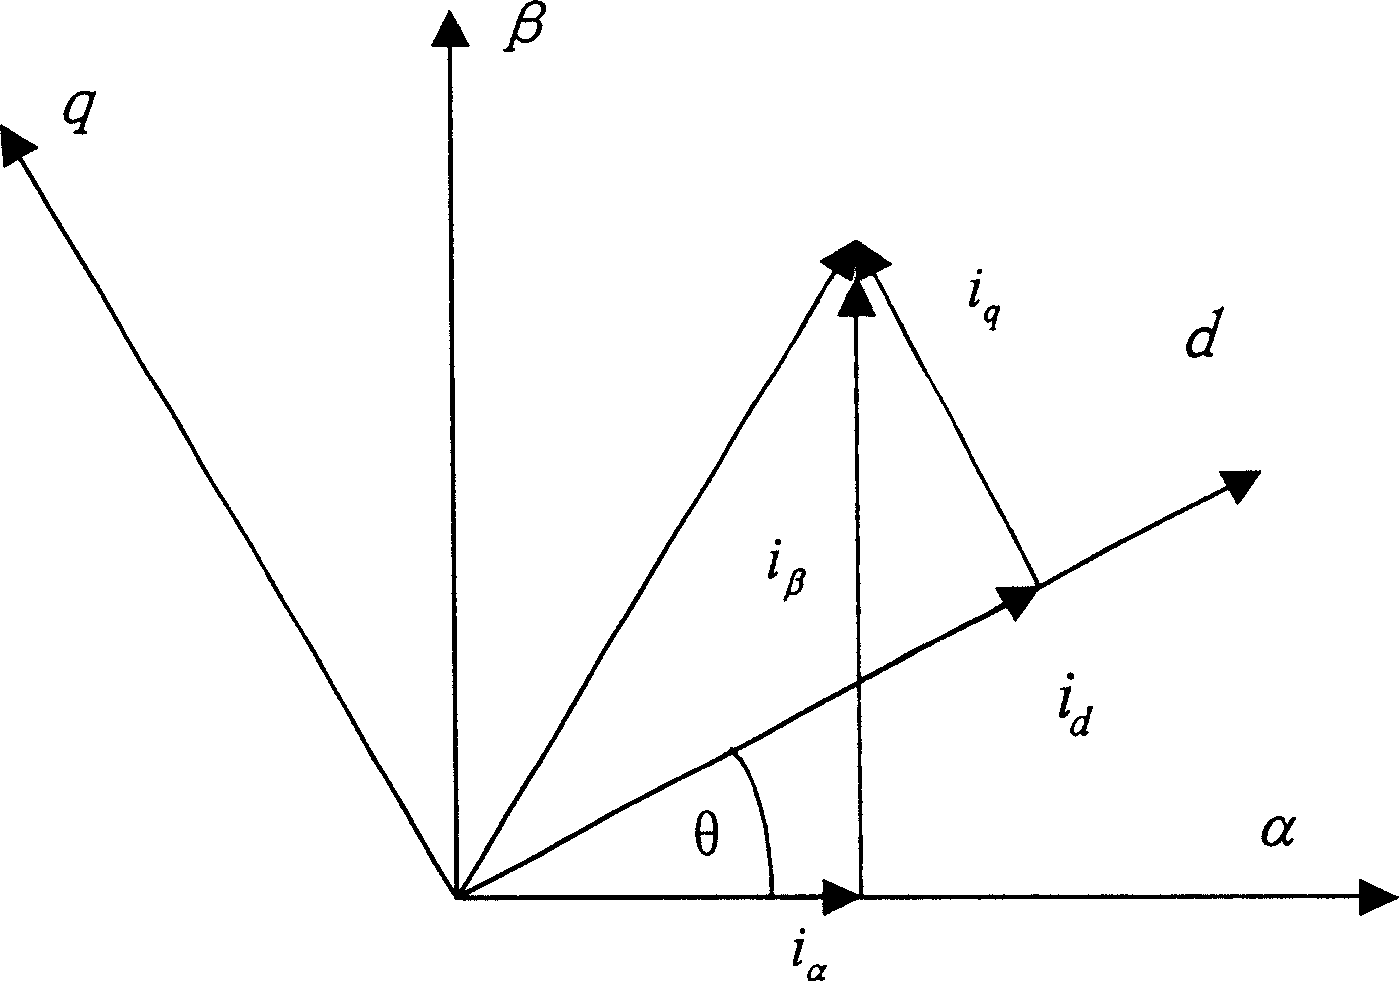 Theta angle iteration compensation method in linear motor vector control